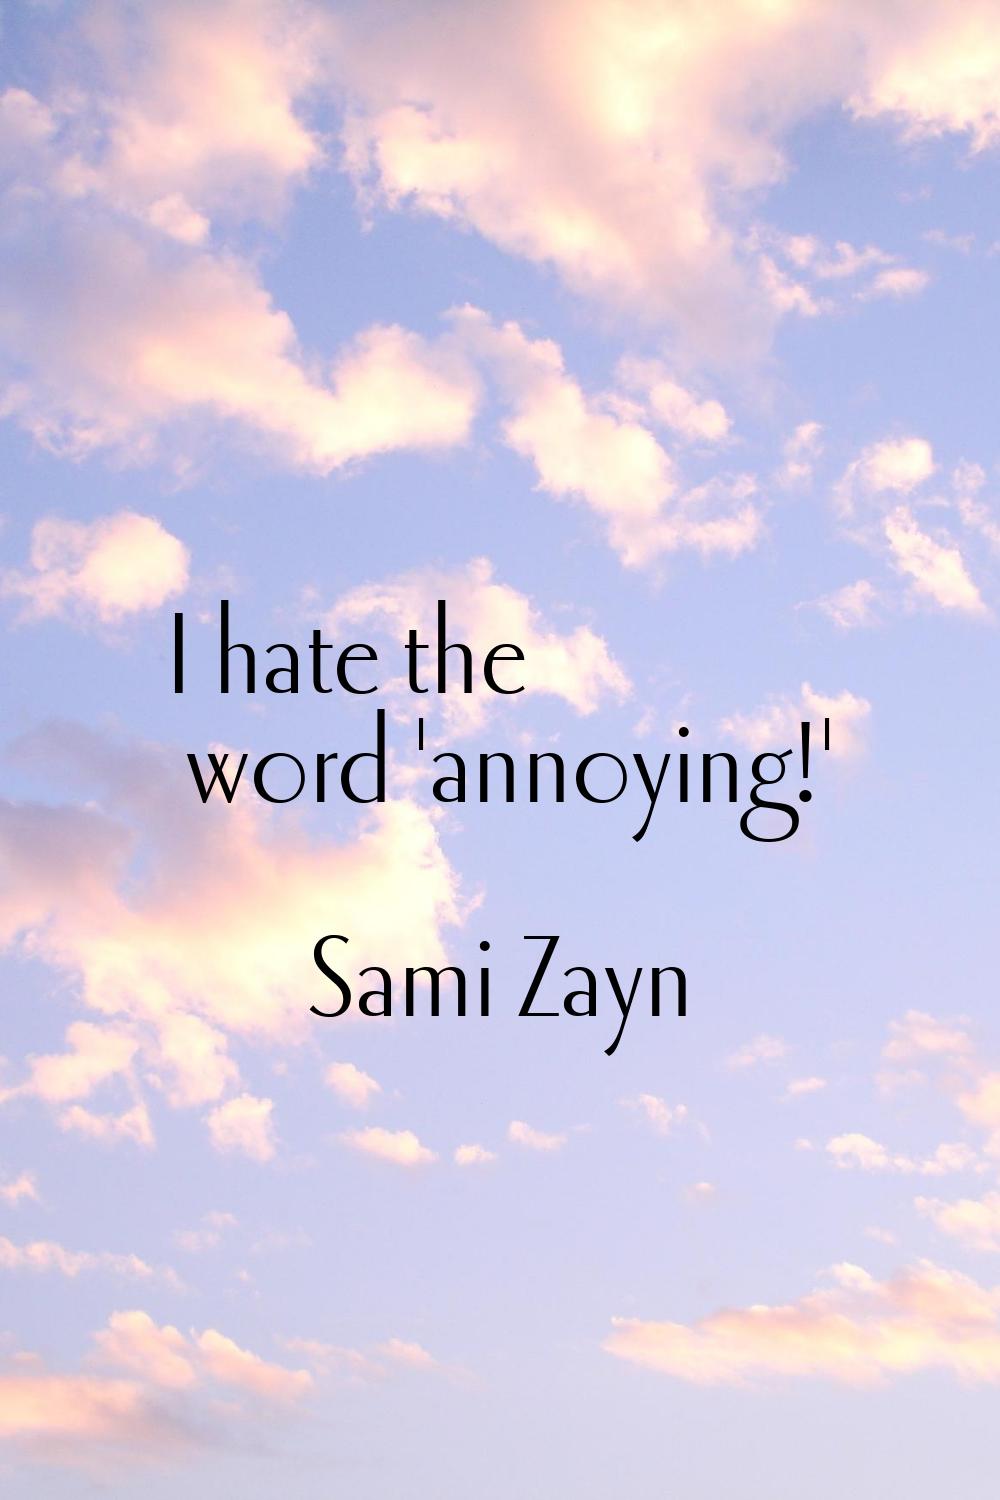 I hate the word 'annoying!'